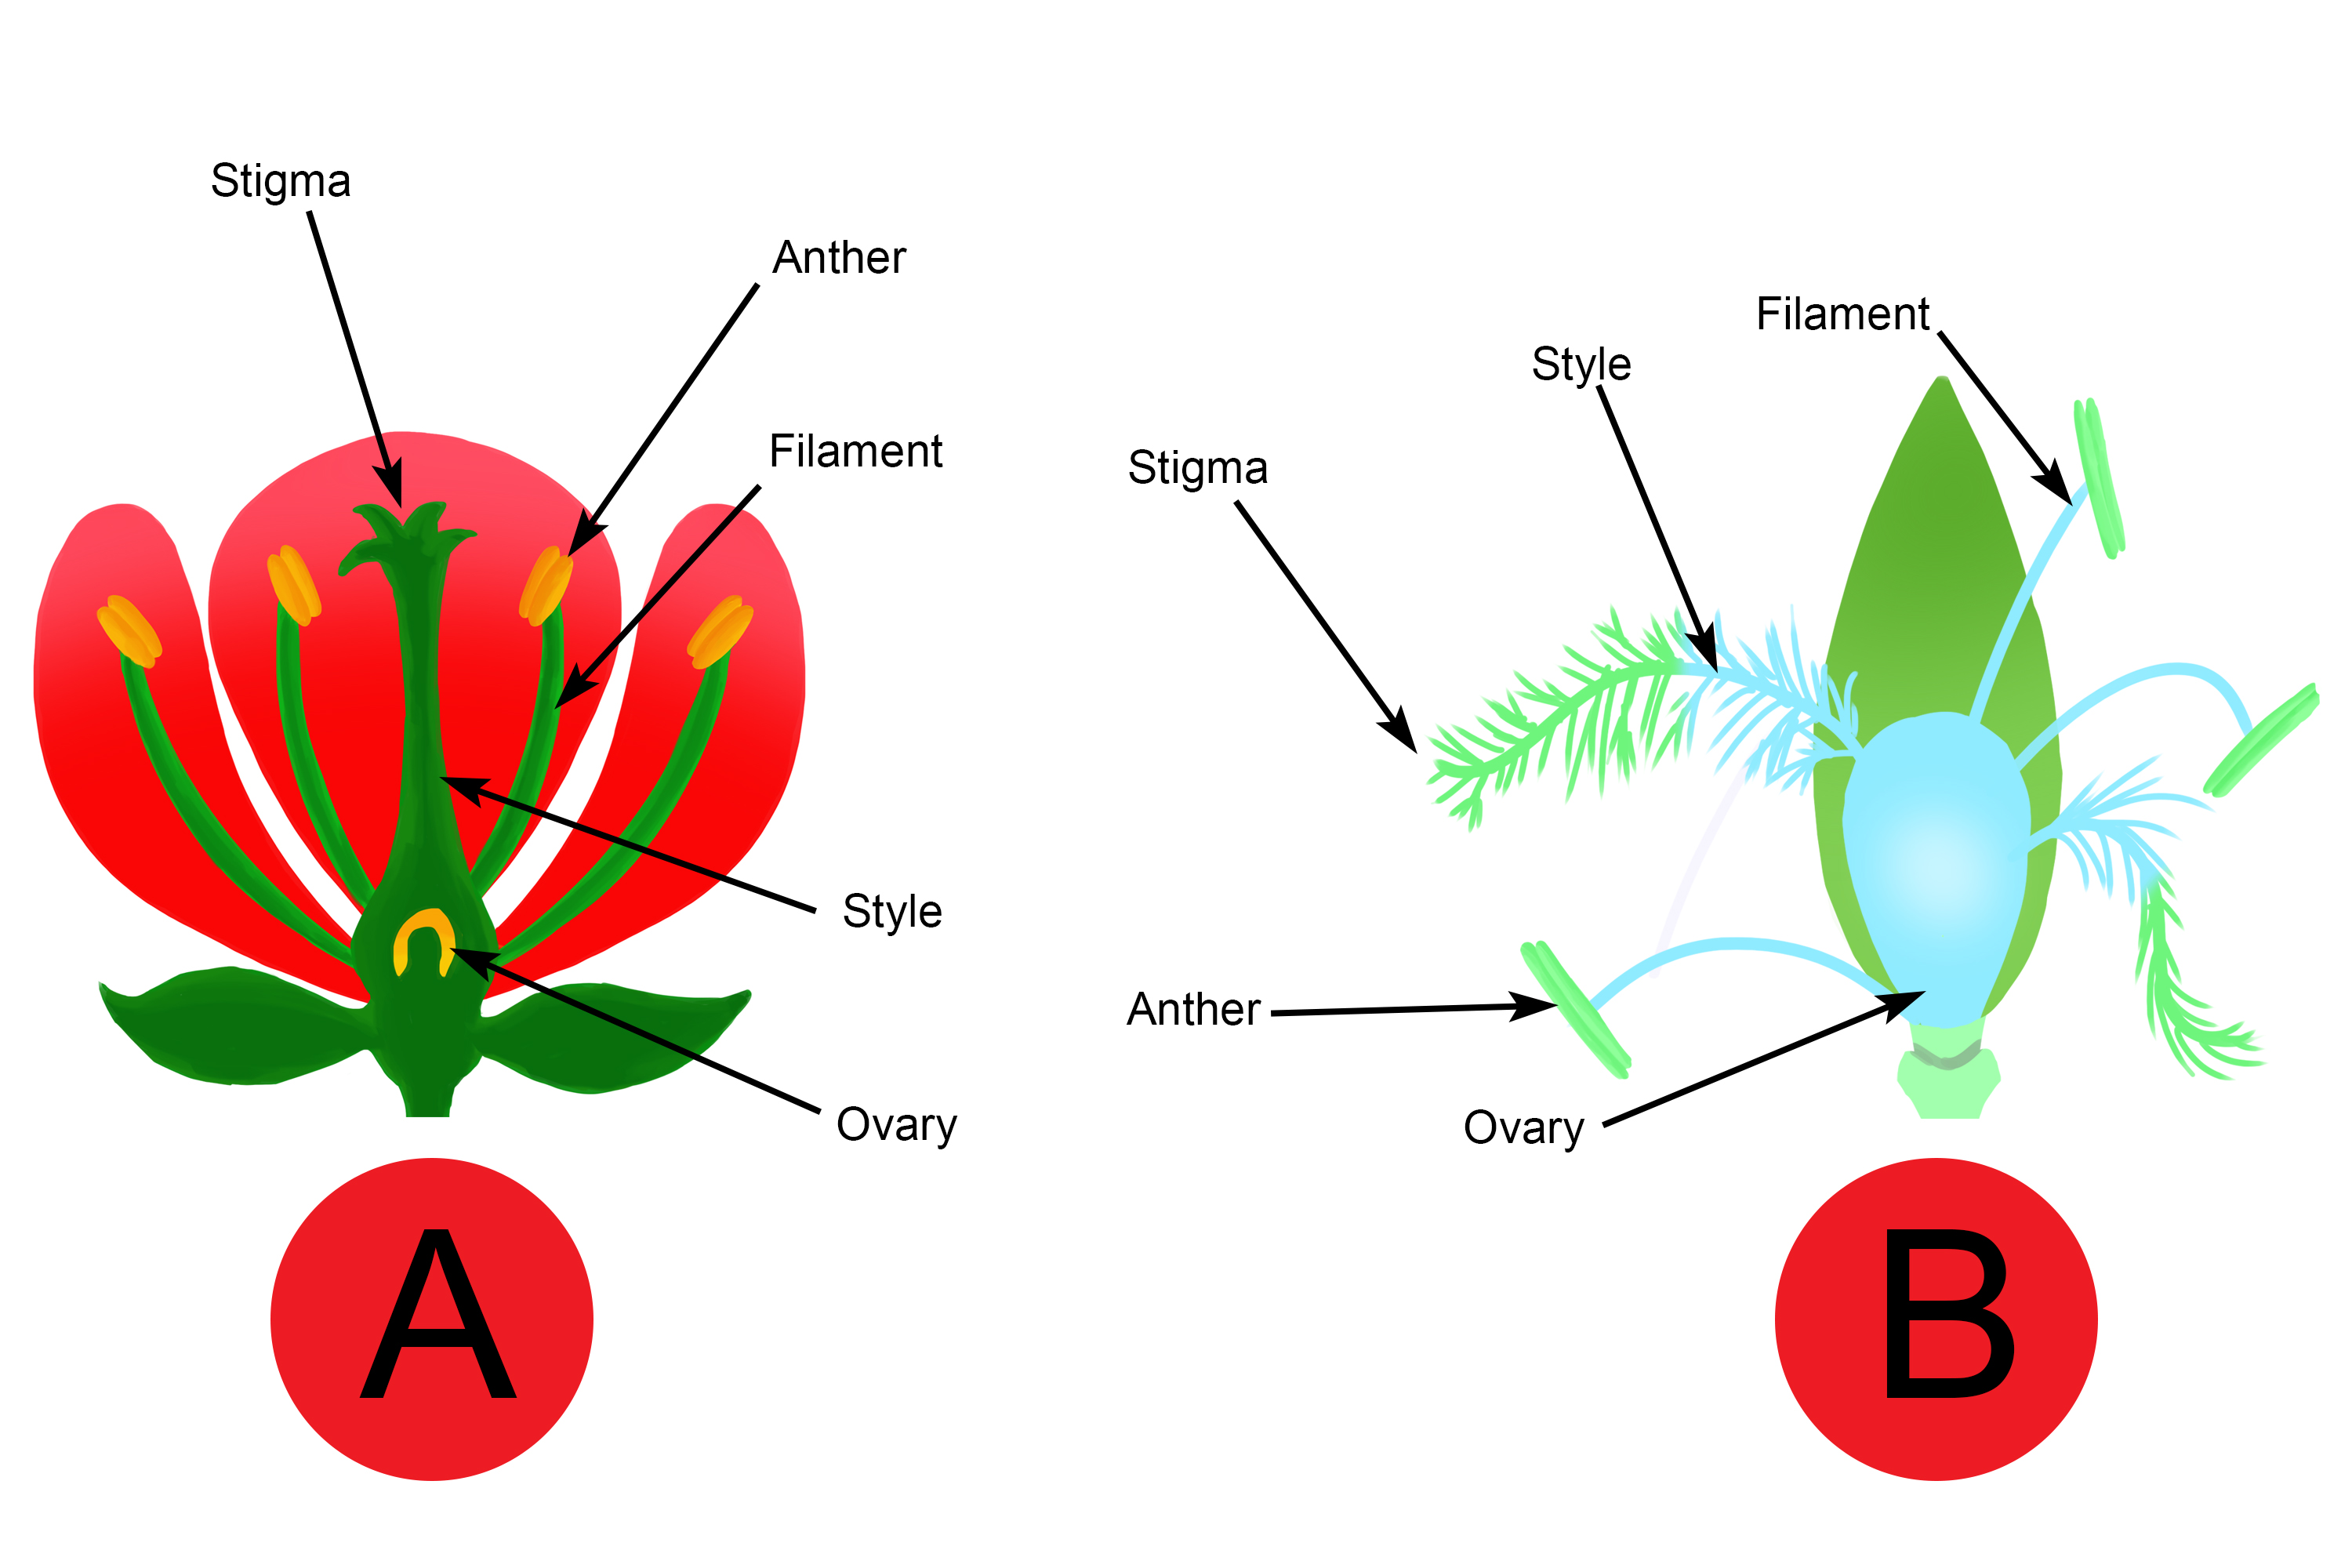 Diagram containing 2 different types of plant, which one is best pollinated by the wind?